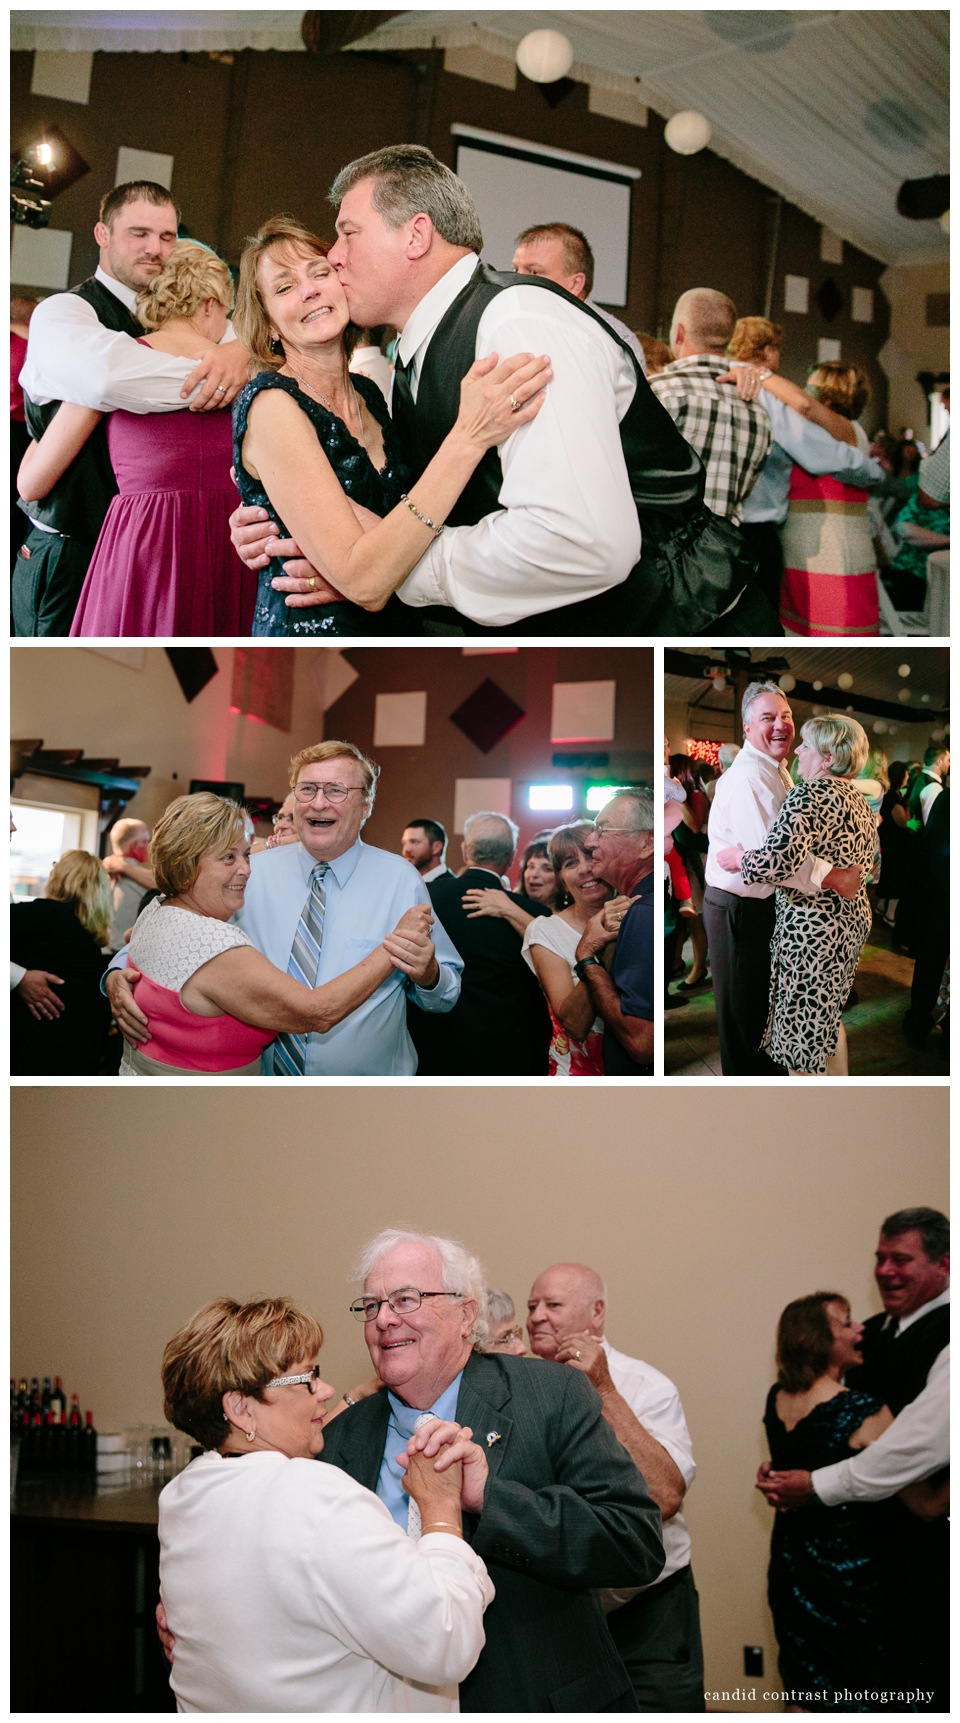 candid contrast photography, wedding reception at the shore event centre bellevue ia wedding